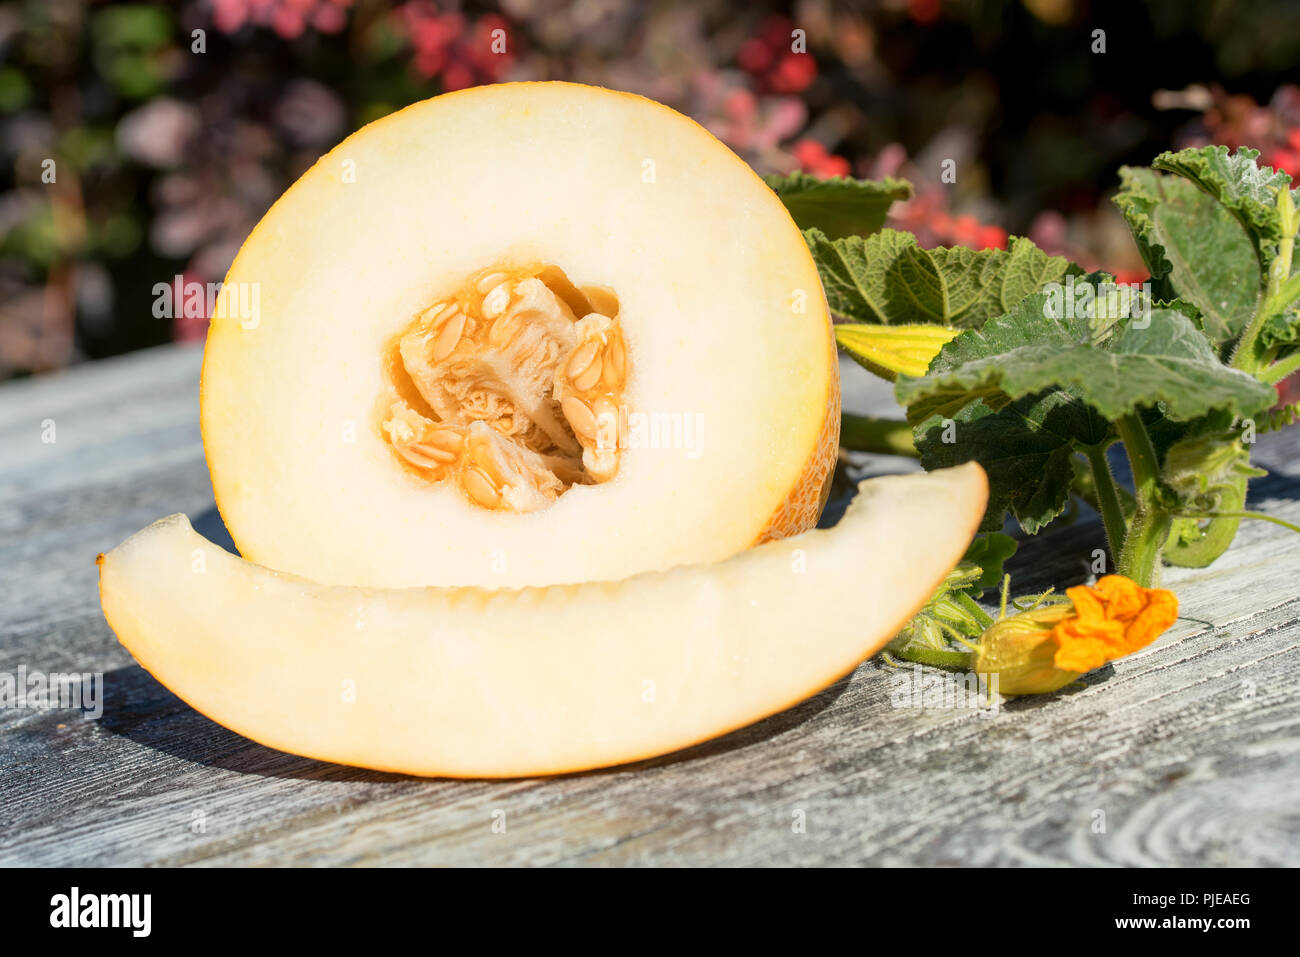 Half of melon and slices on wooden table outdoors Stock Photo